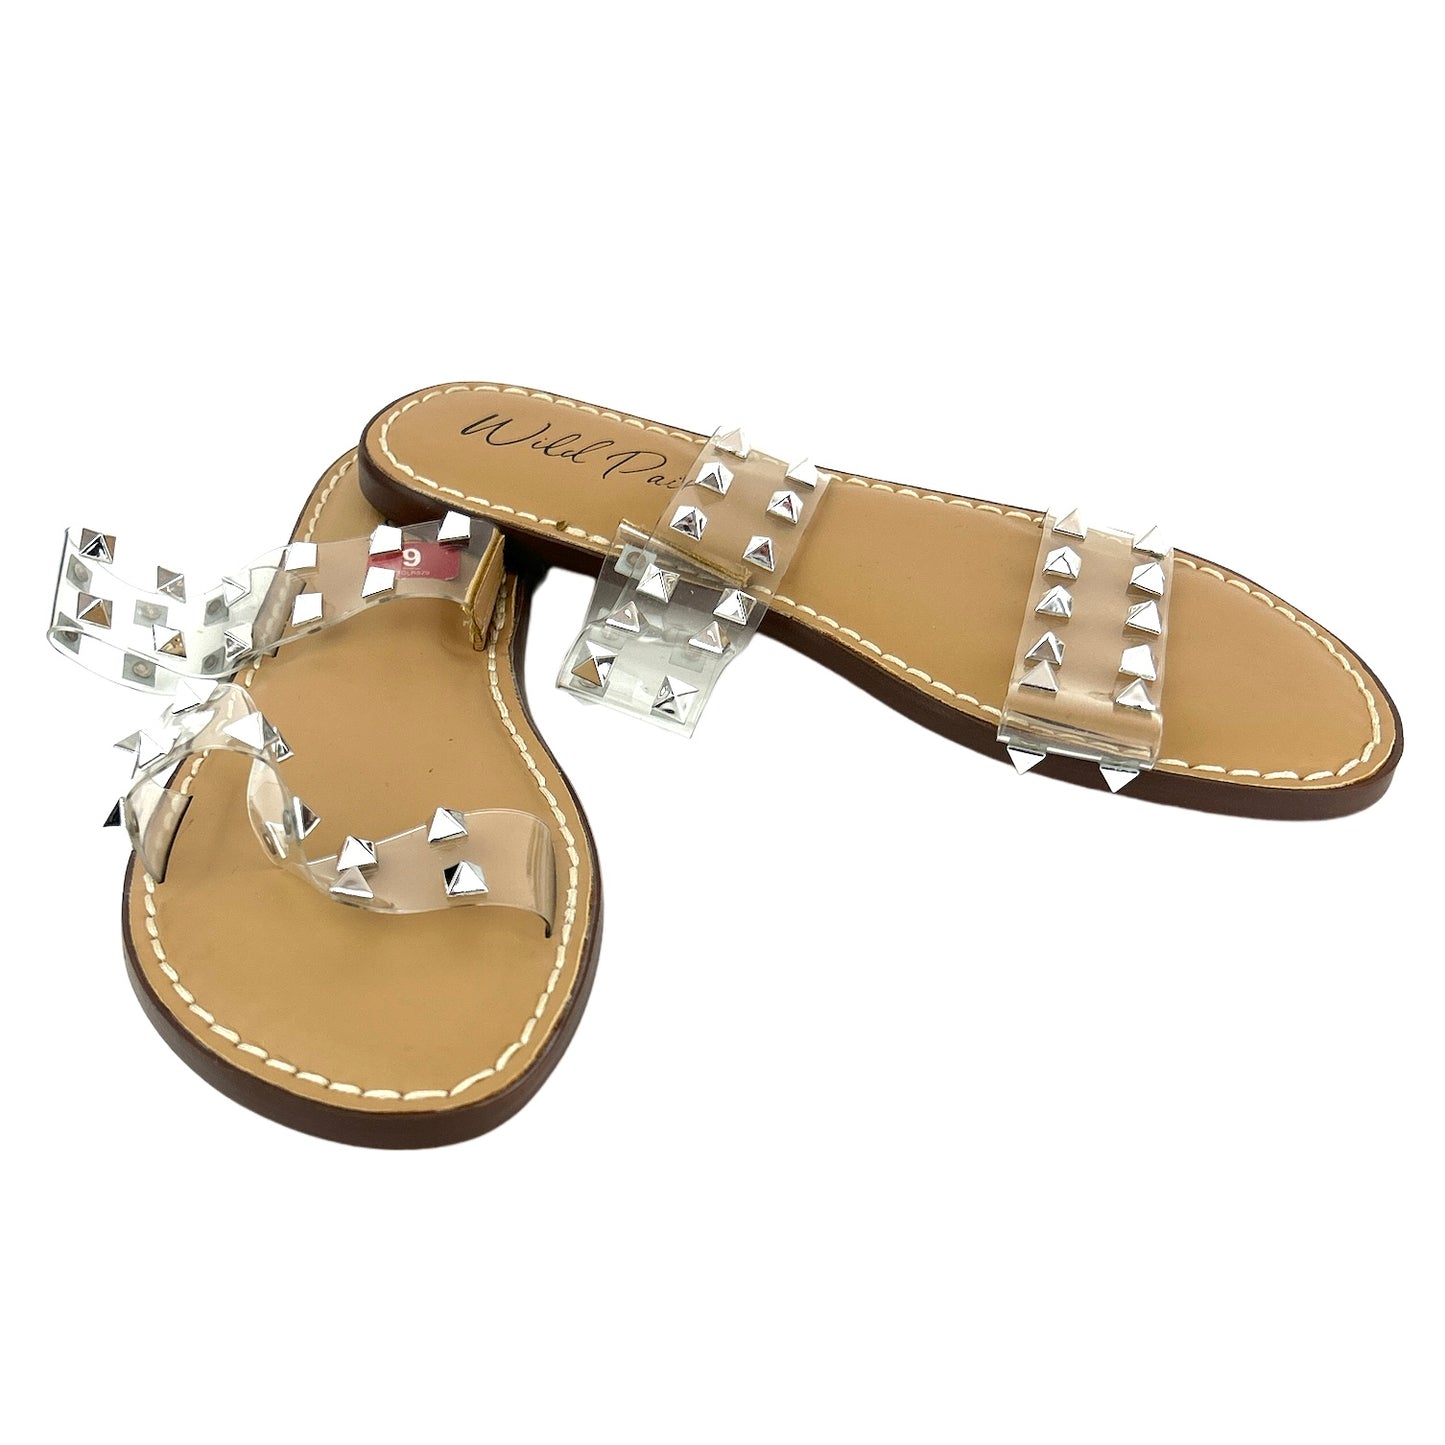 GINNIEV Double Band Slide Flats Silver Stud Size 9 Women's Sandals